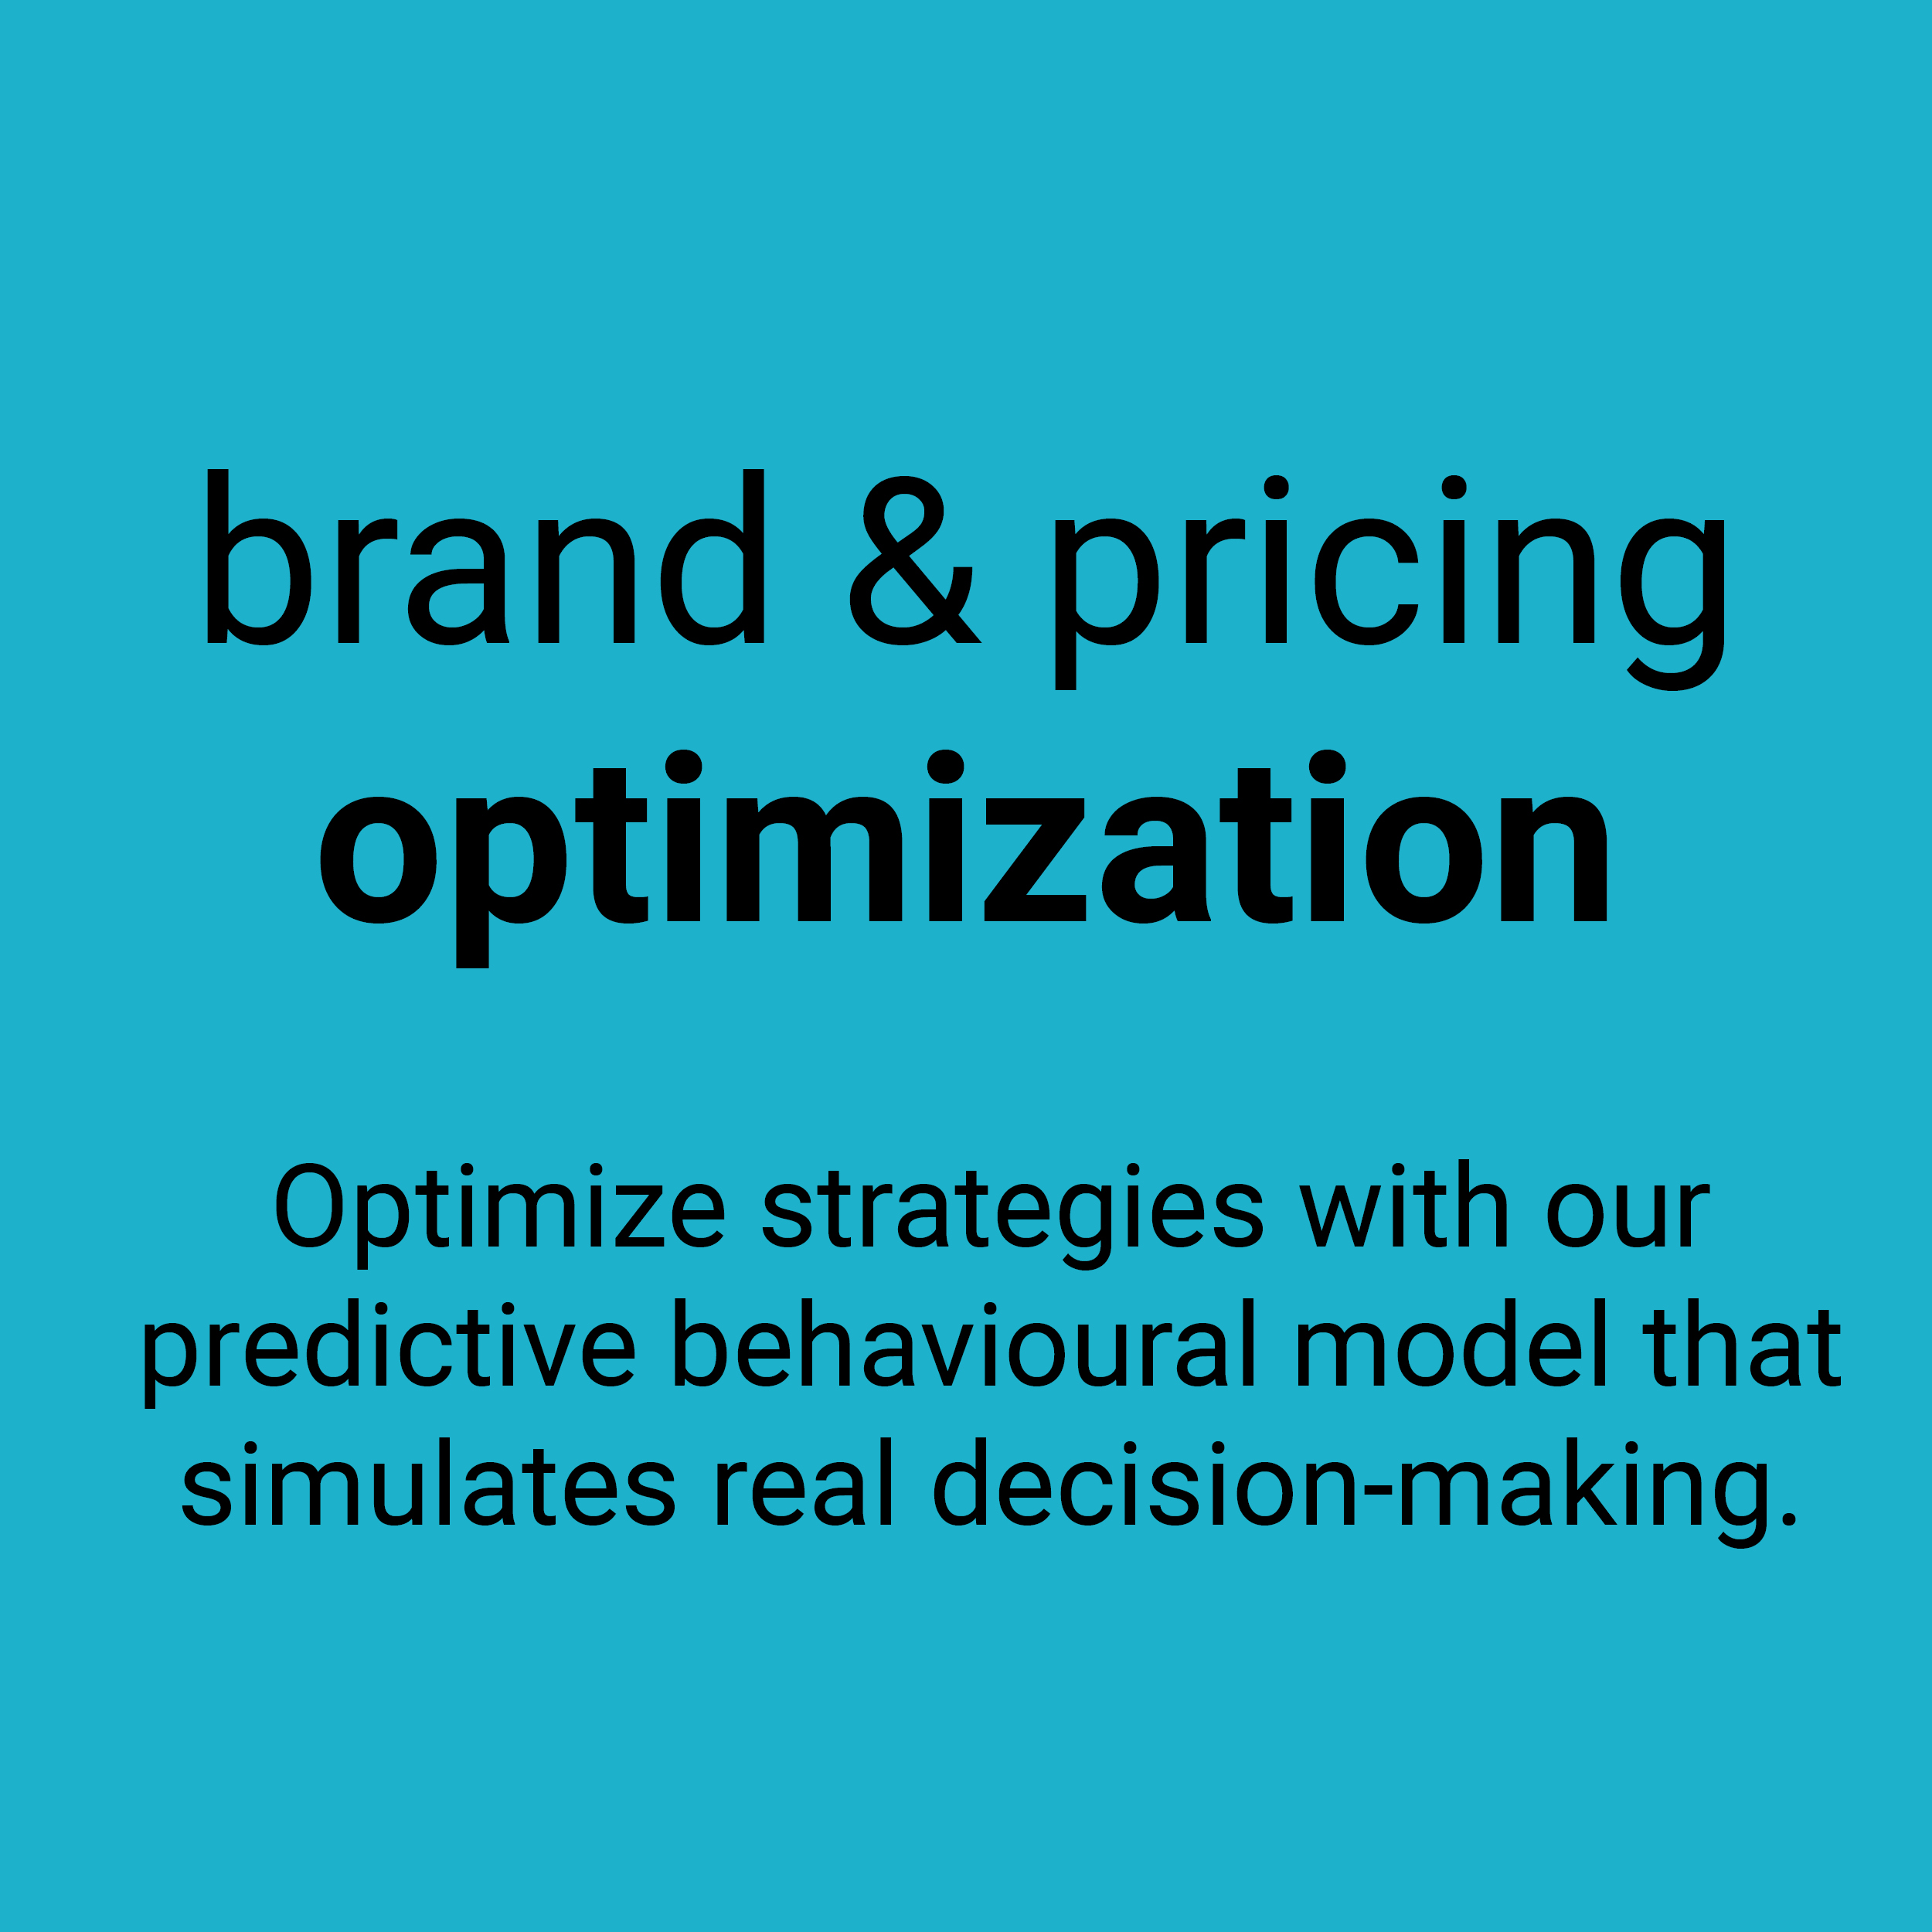 Brand & pricing optimization. Optimize strategies with our predictive behavioural model that simulates real decision-making.